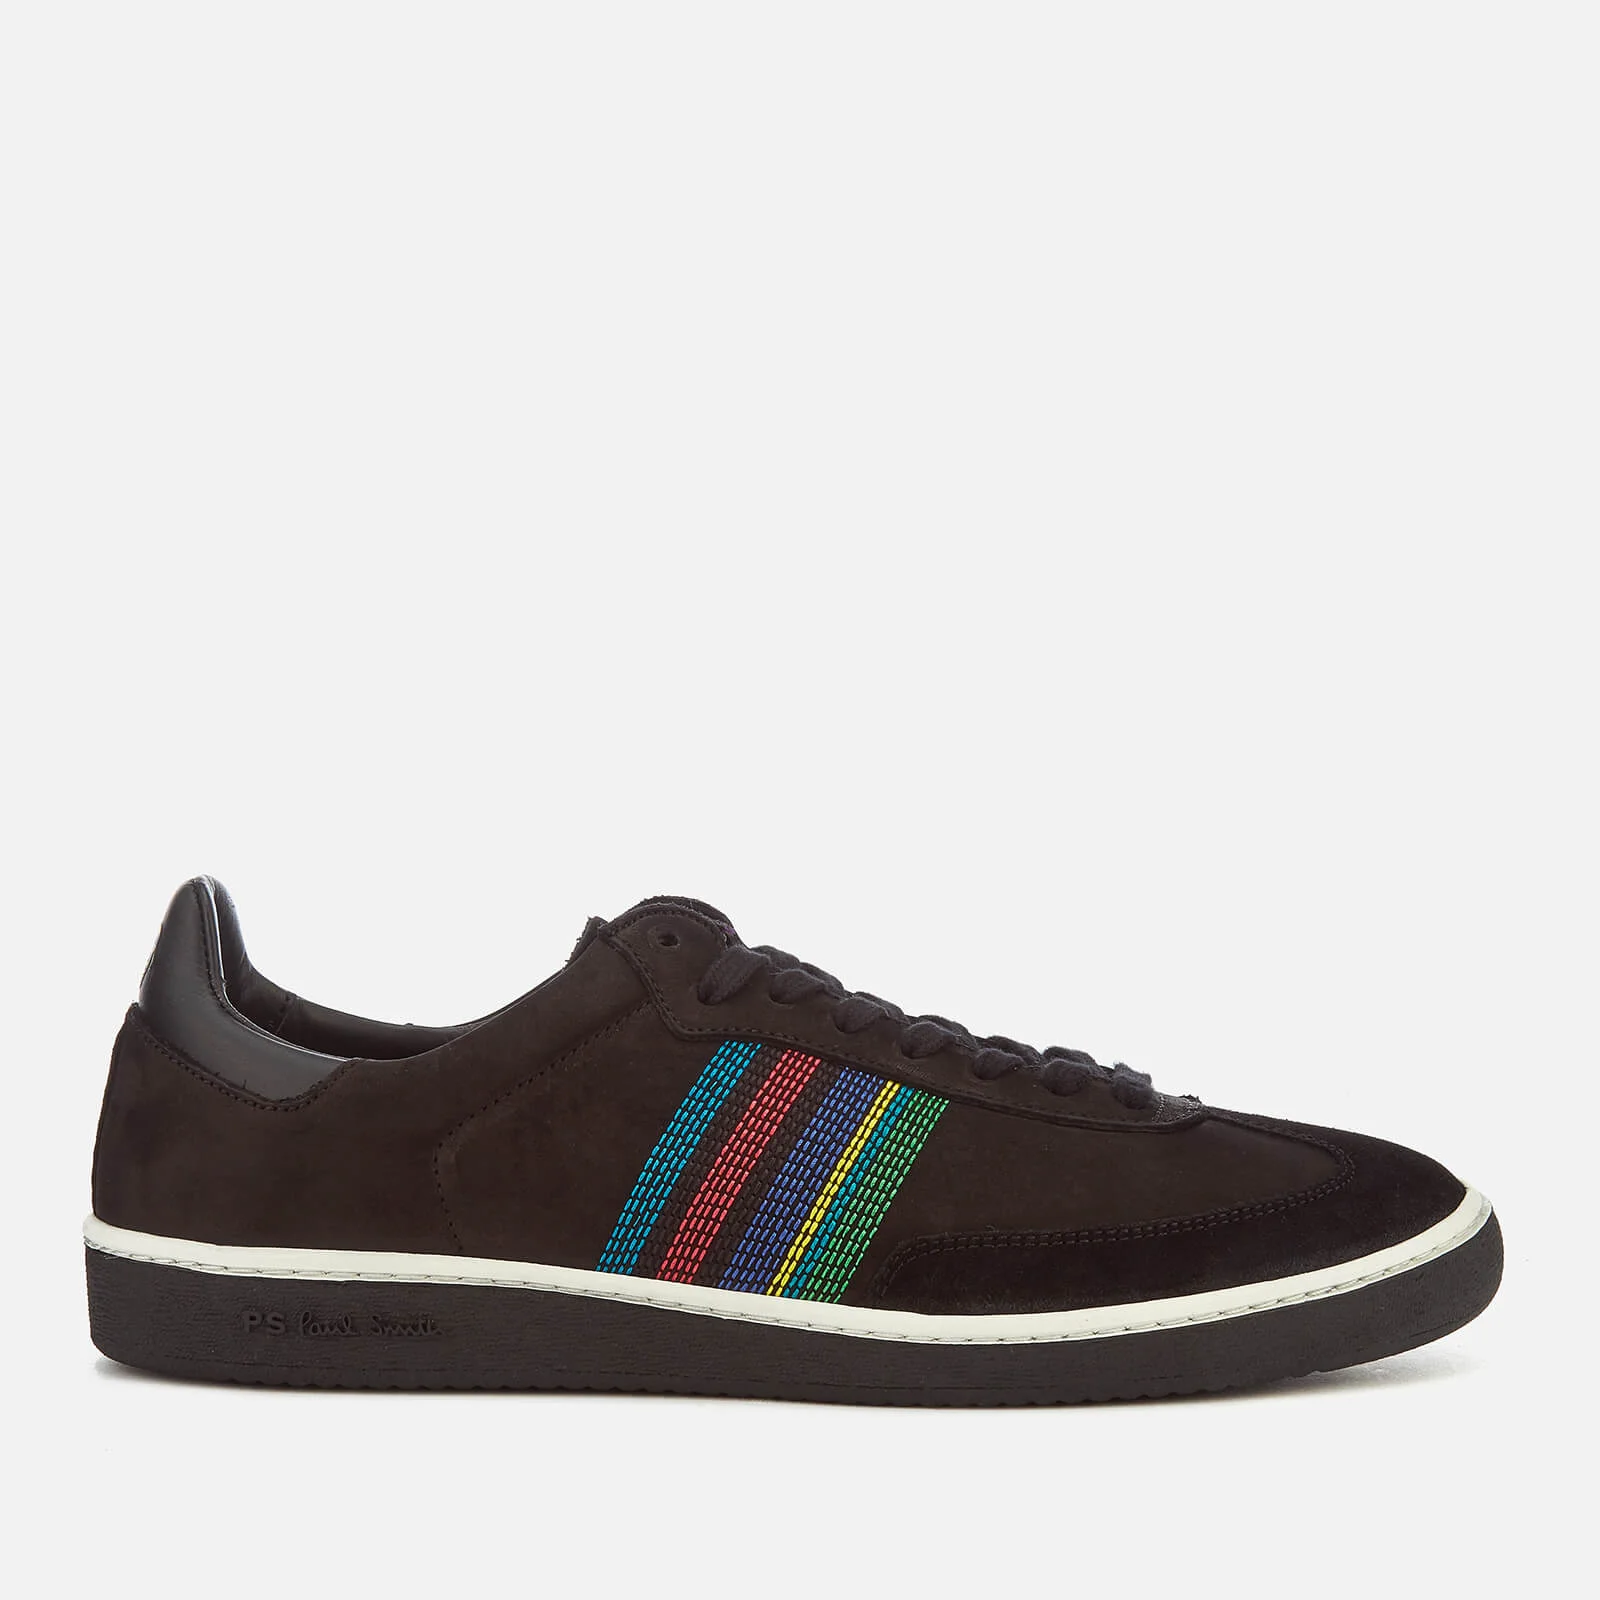 PS Paul Smith Men's Yuki Wing Tip Trainers - Black Image 1